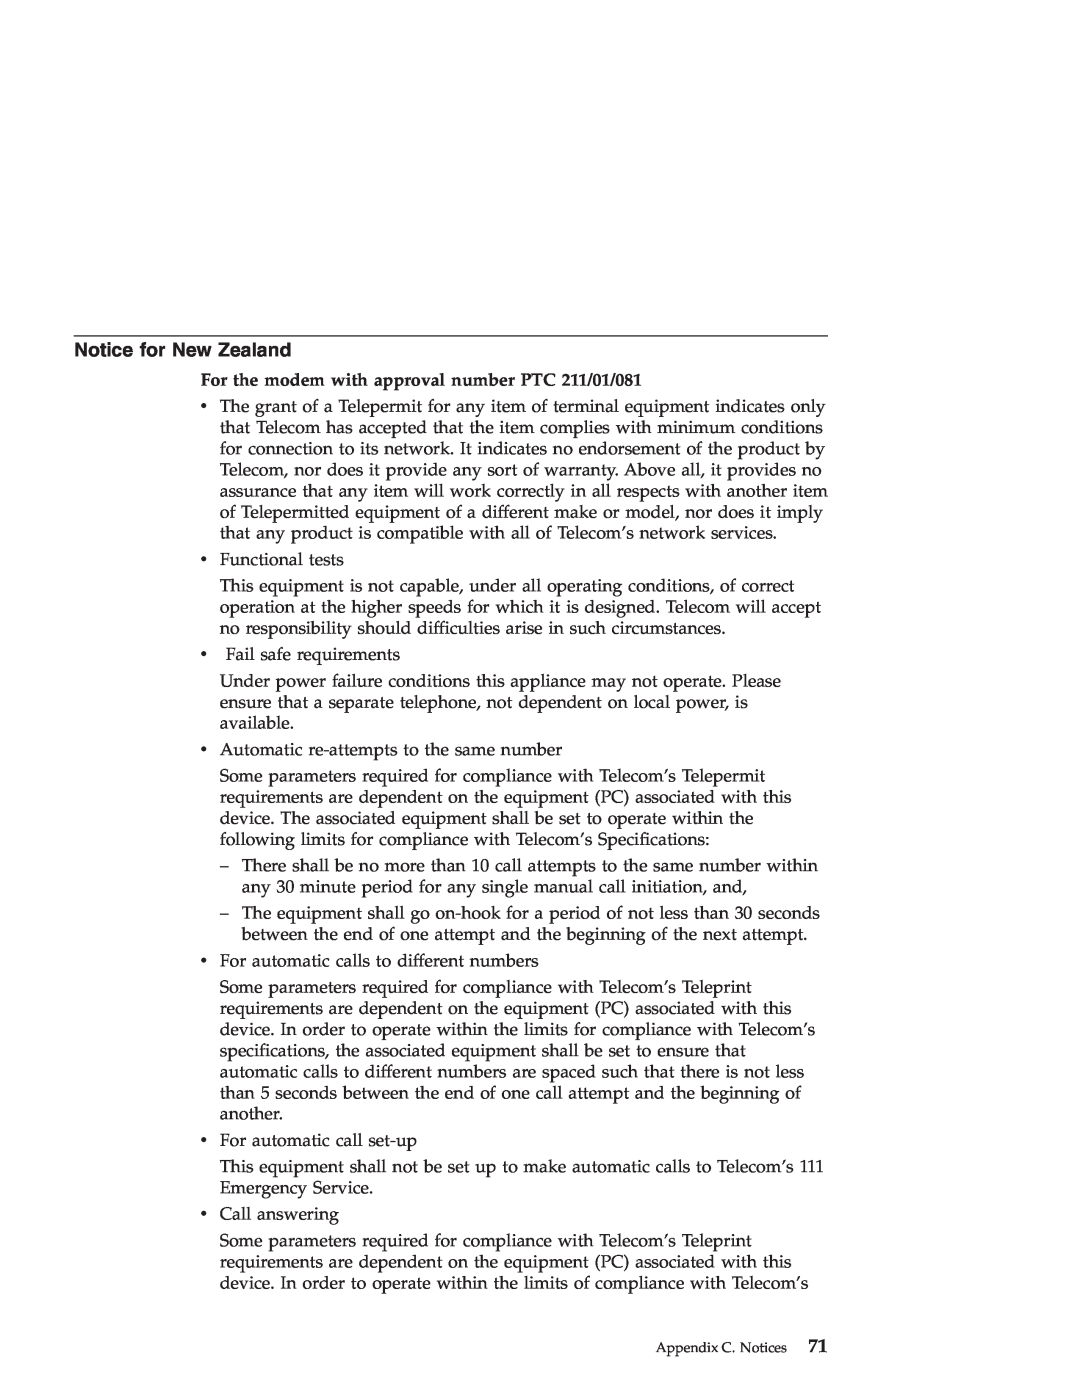 IBM R30 manual Notice for New Zealand, For the modem with approval number PTC 211/01/081 